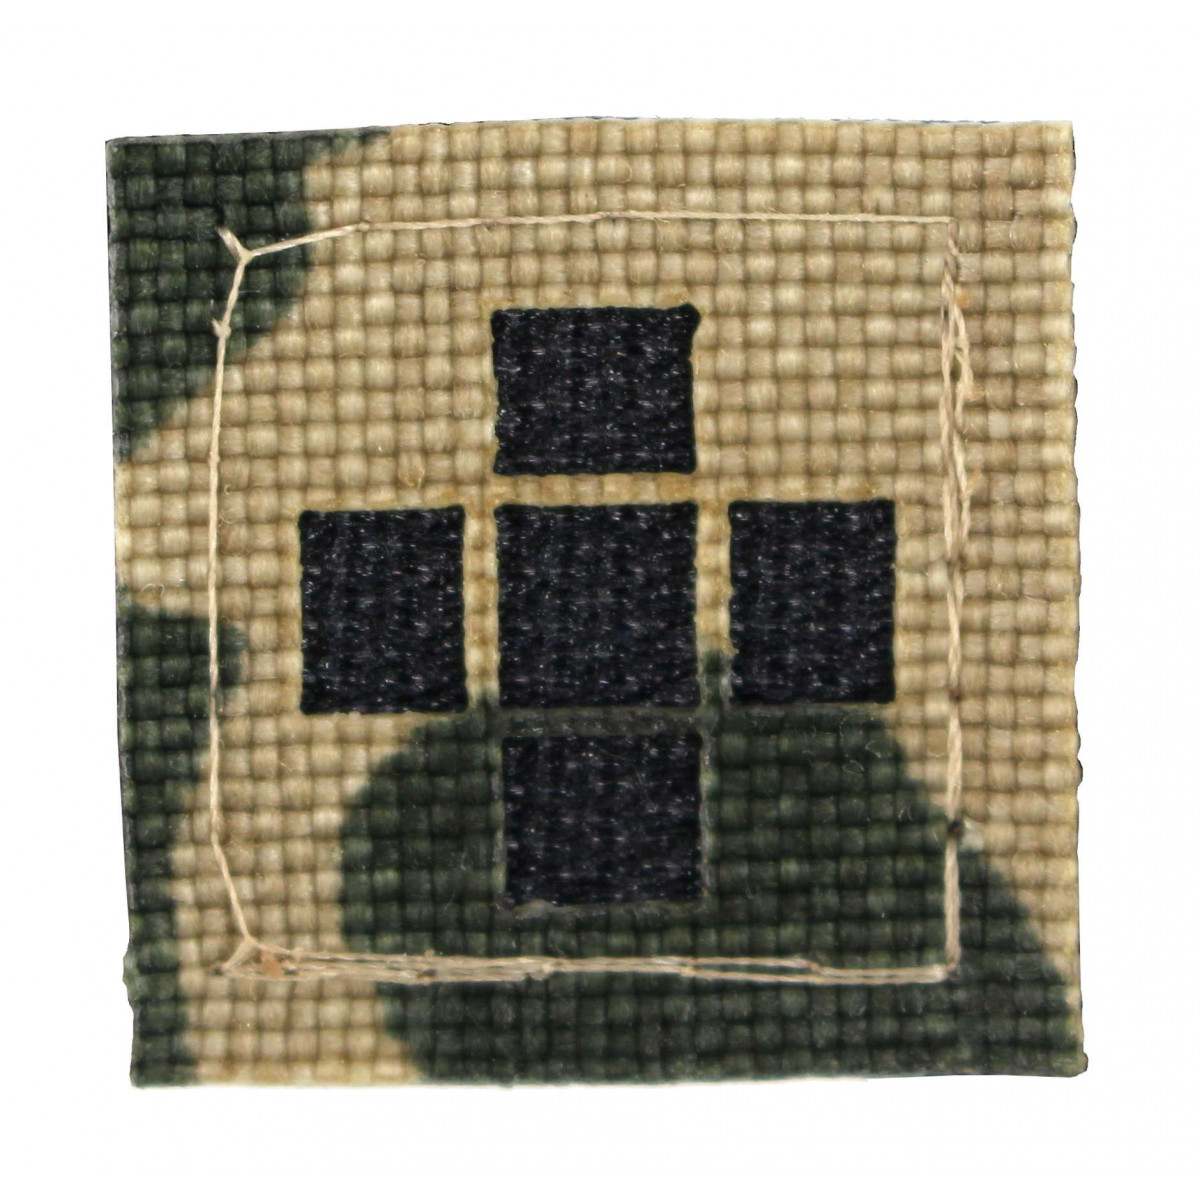 Red Cross Patch Small